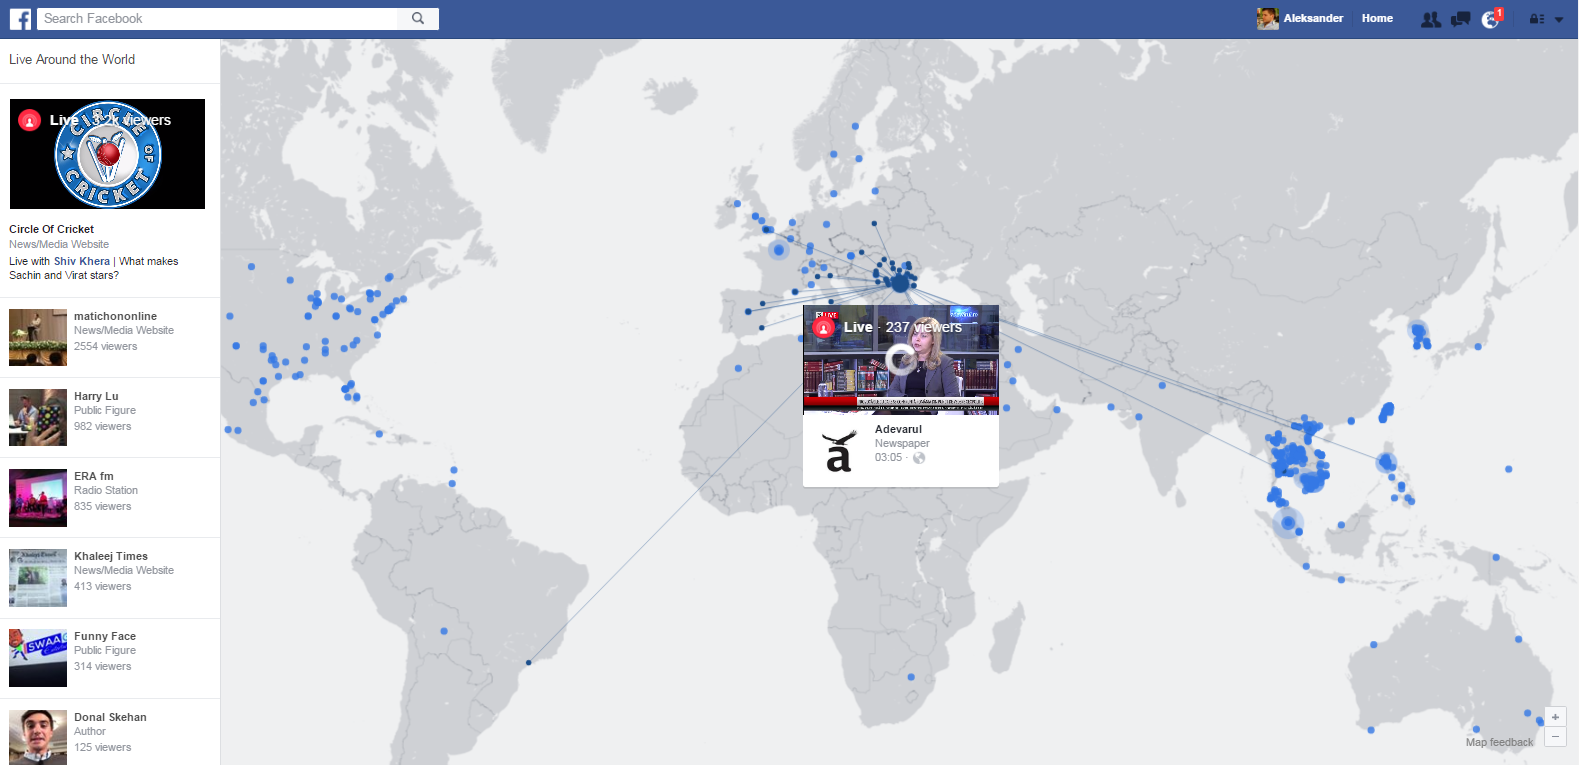 Facebook Live Map Geoawesomeness